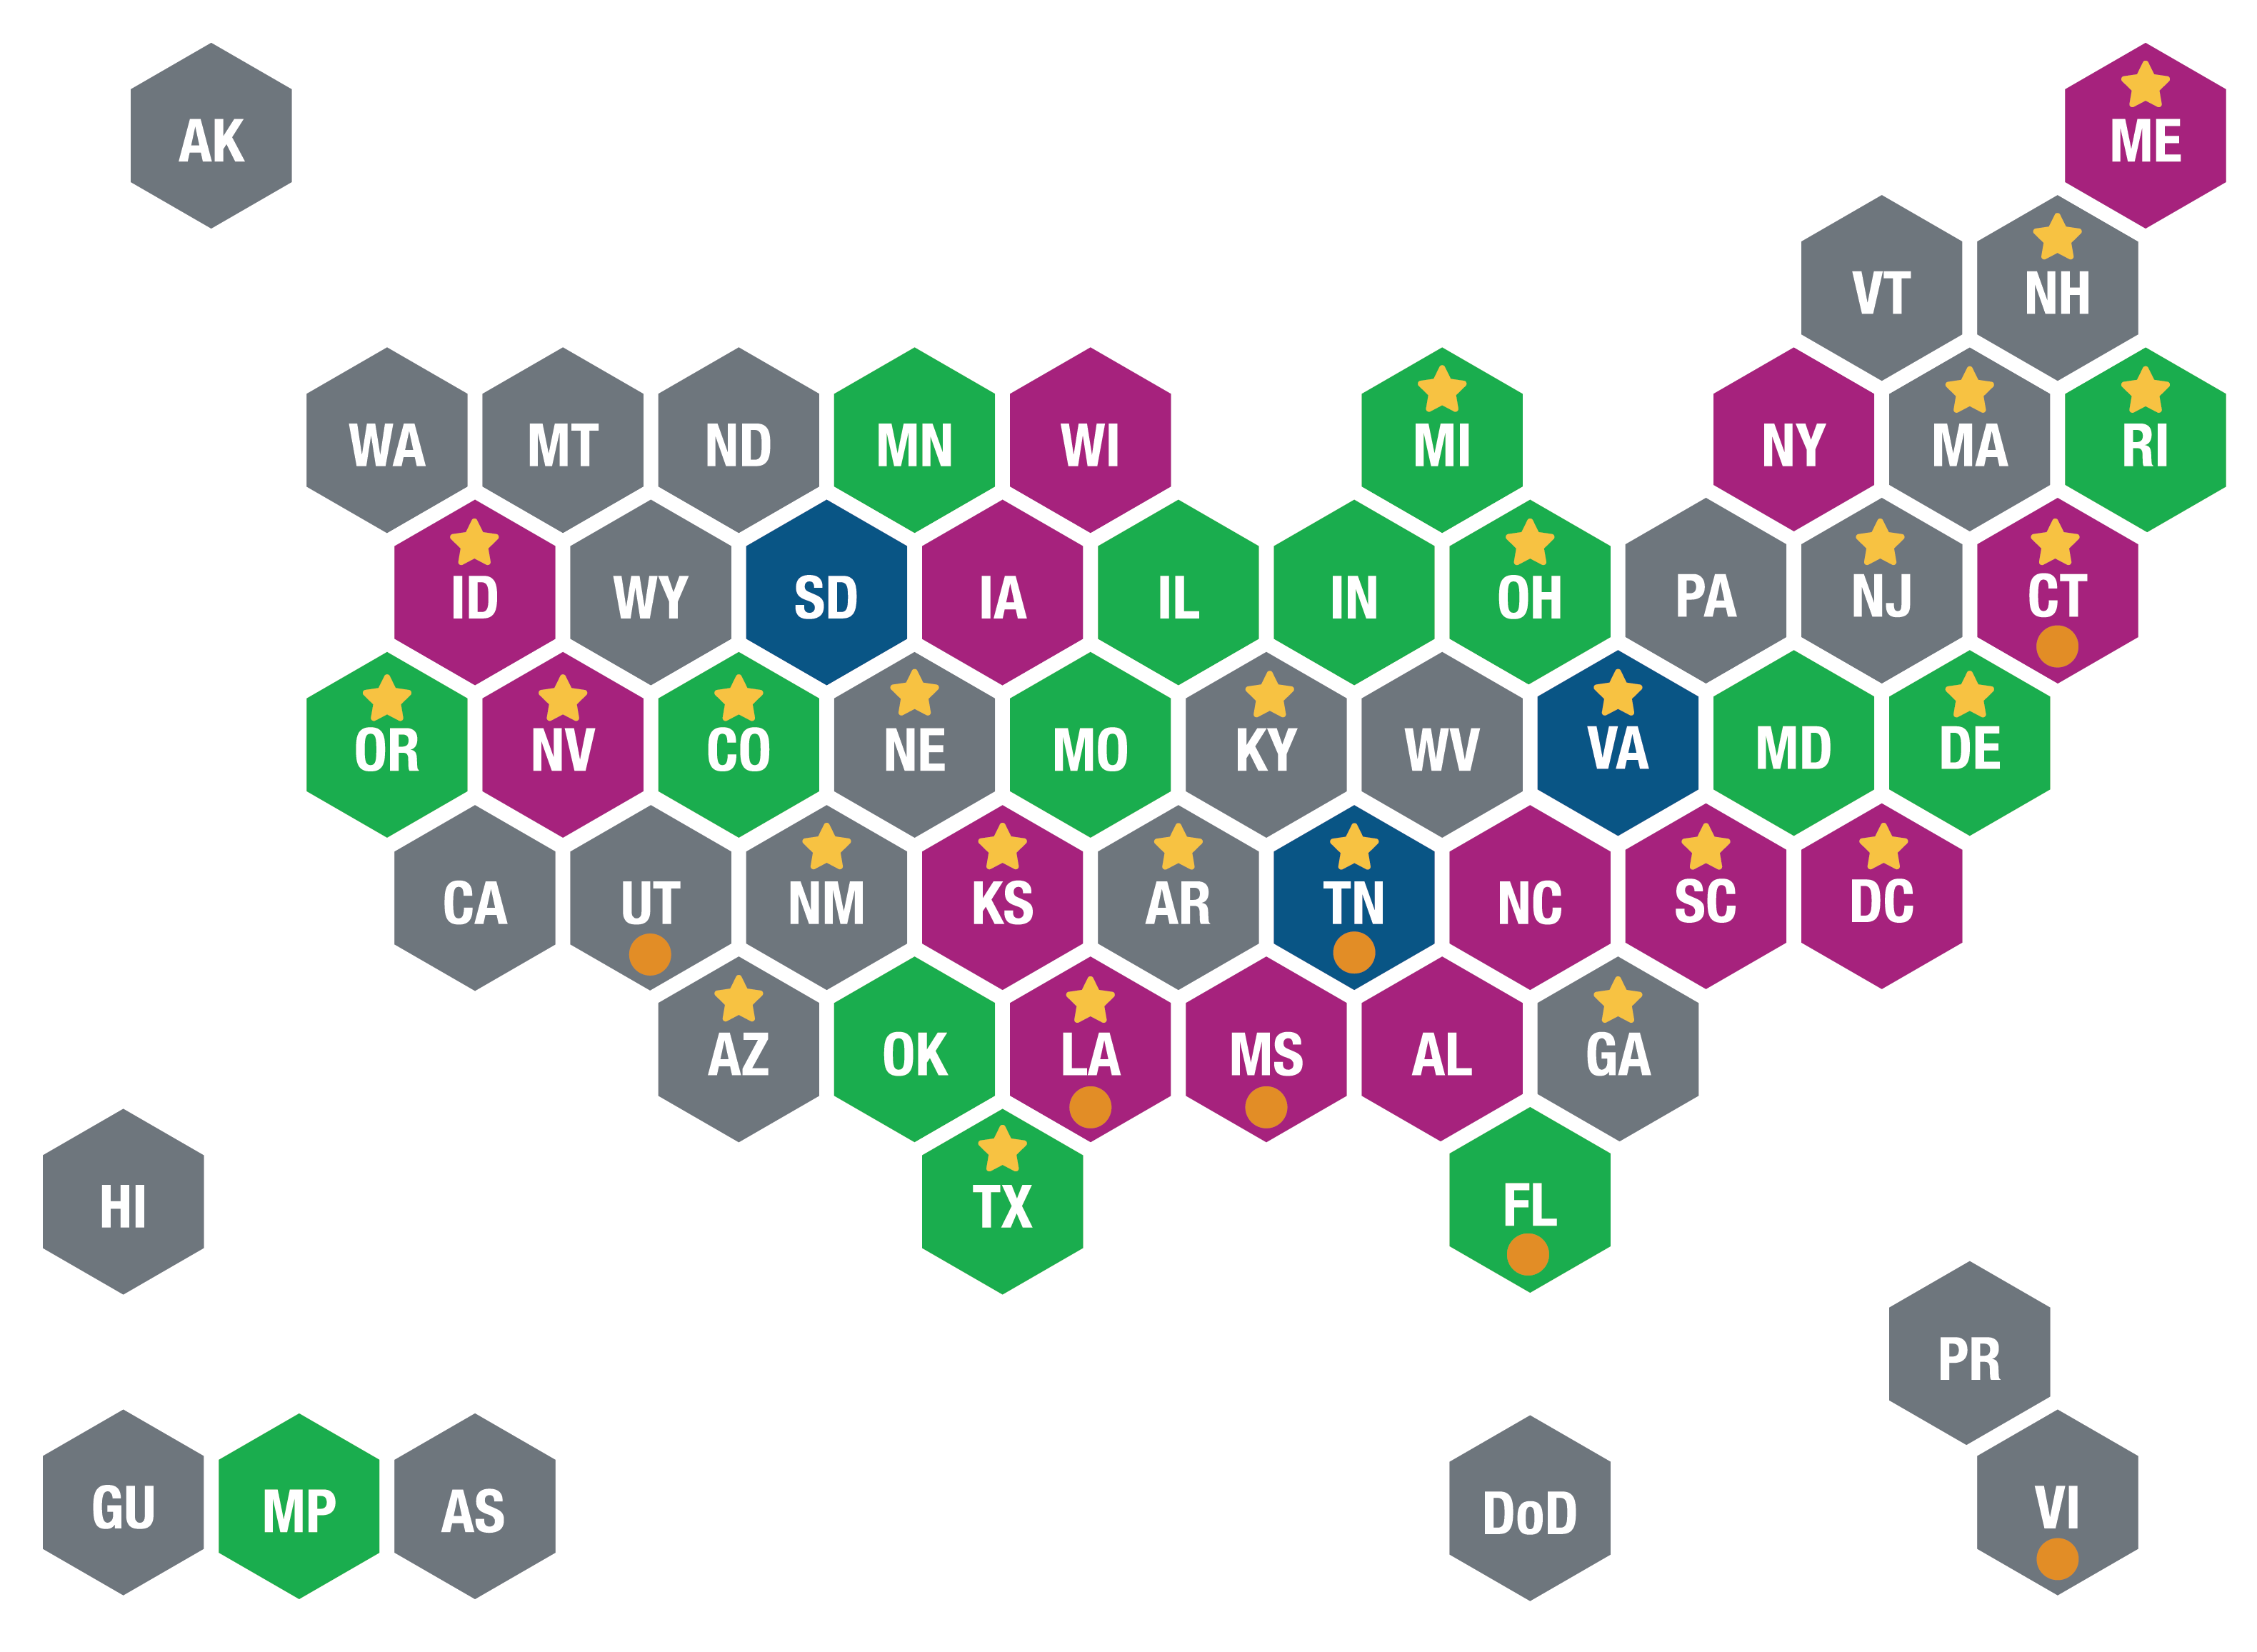 Figure: Hexagonal Map of the United States